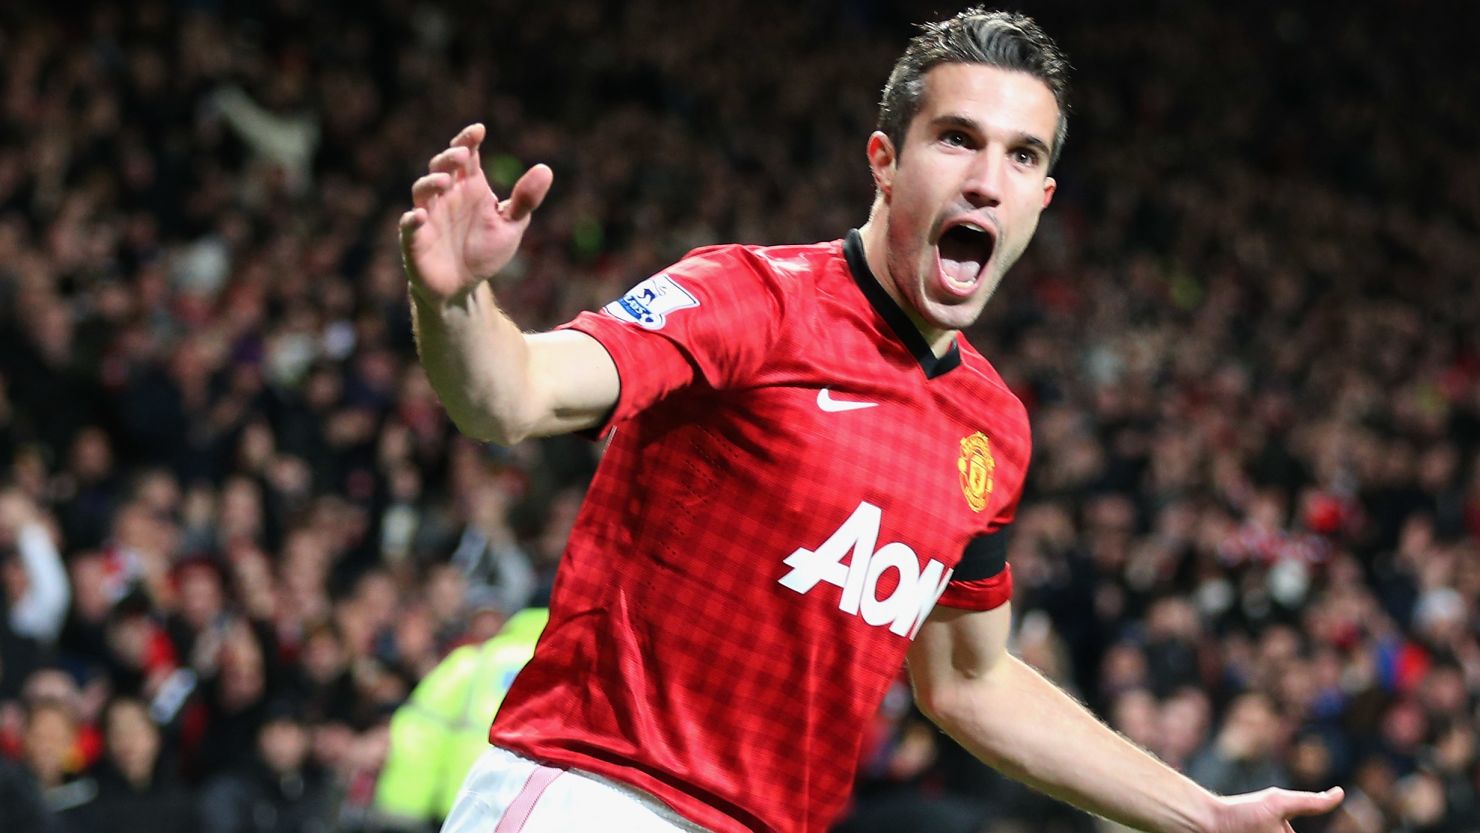 Robin van Persie celebrates his quickfire goal after just 33 seconds for Manchester United against West Ham.